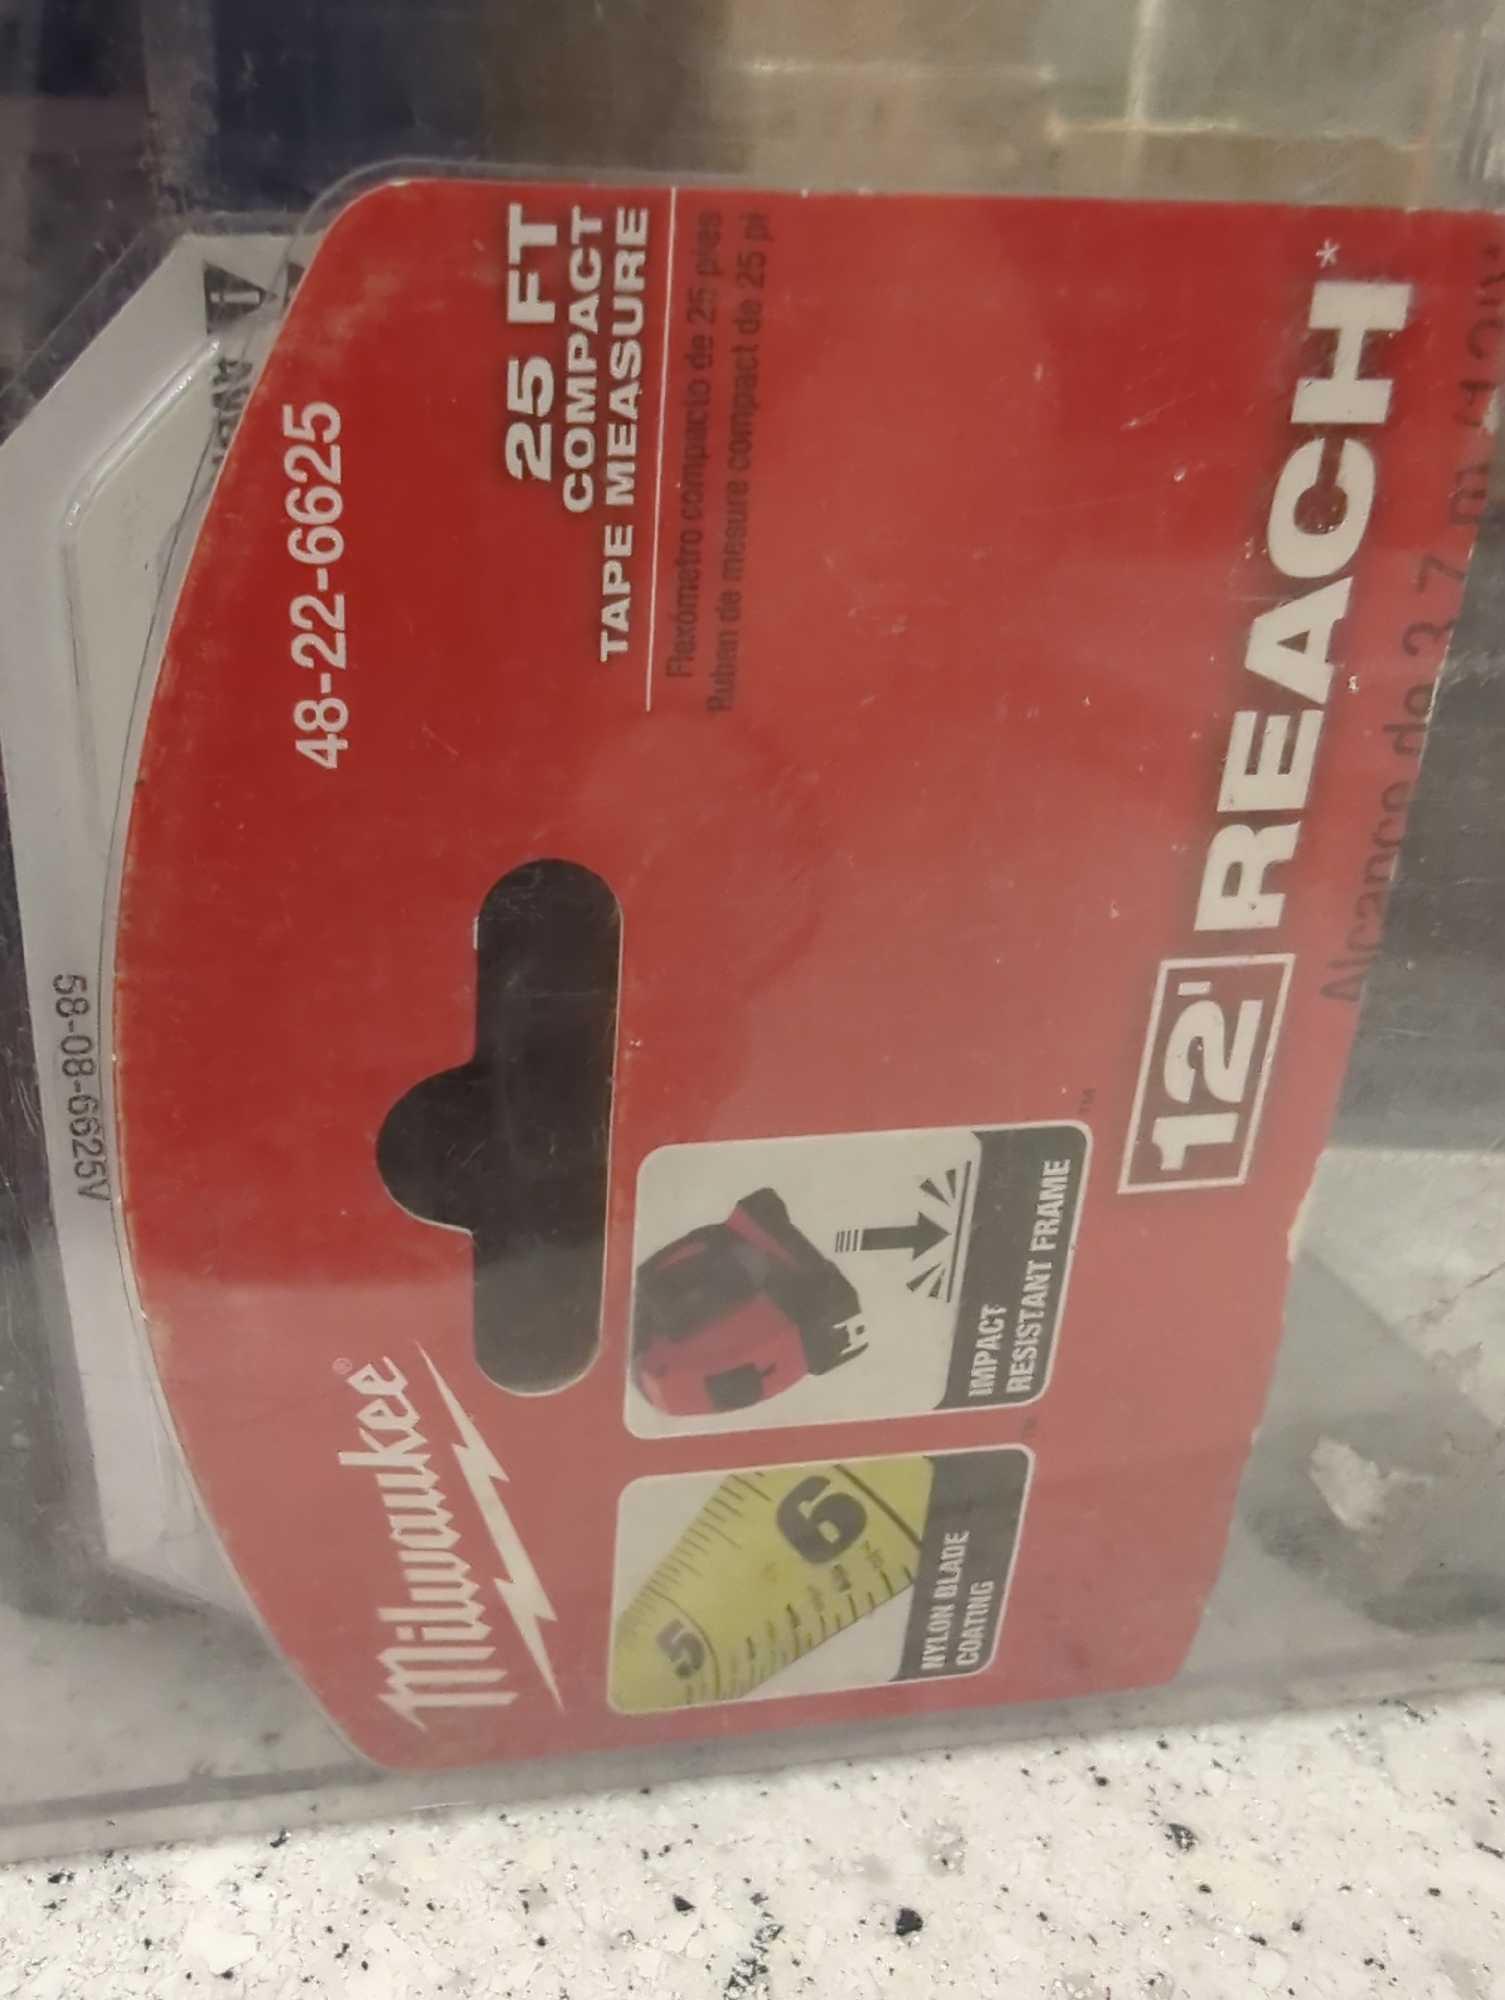 Milwaukee Compact 25 ft. SAE Tape Measure with Fractional Scale and 9 ft. Standout. Comes and sealed